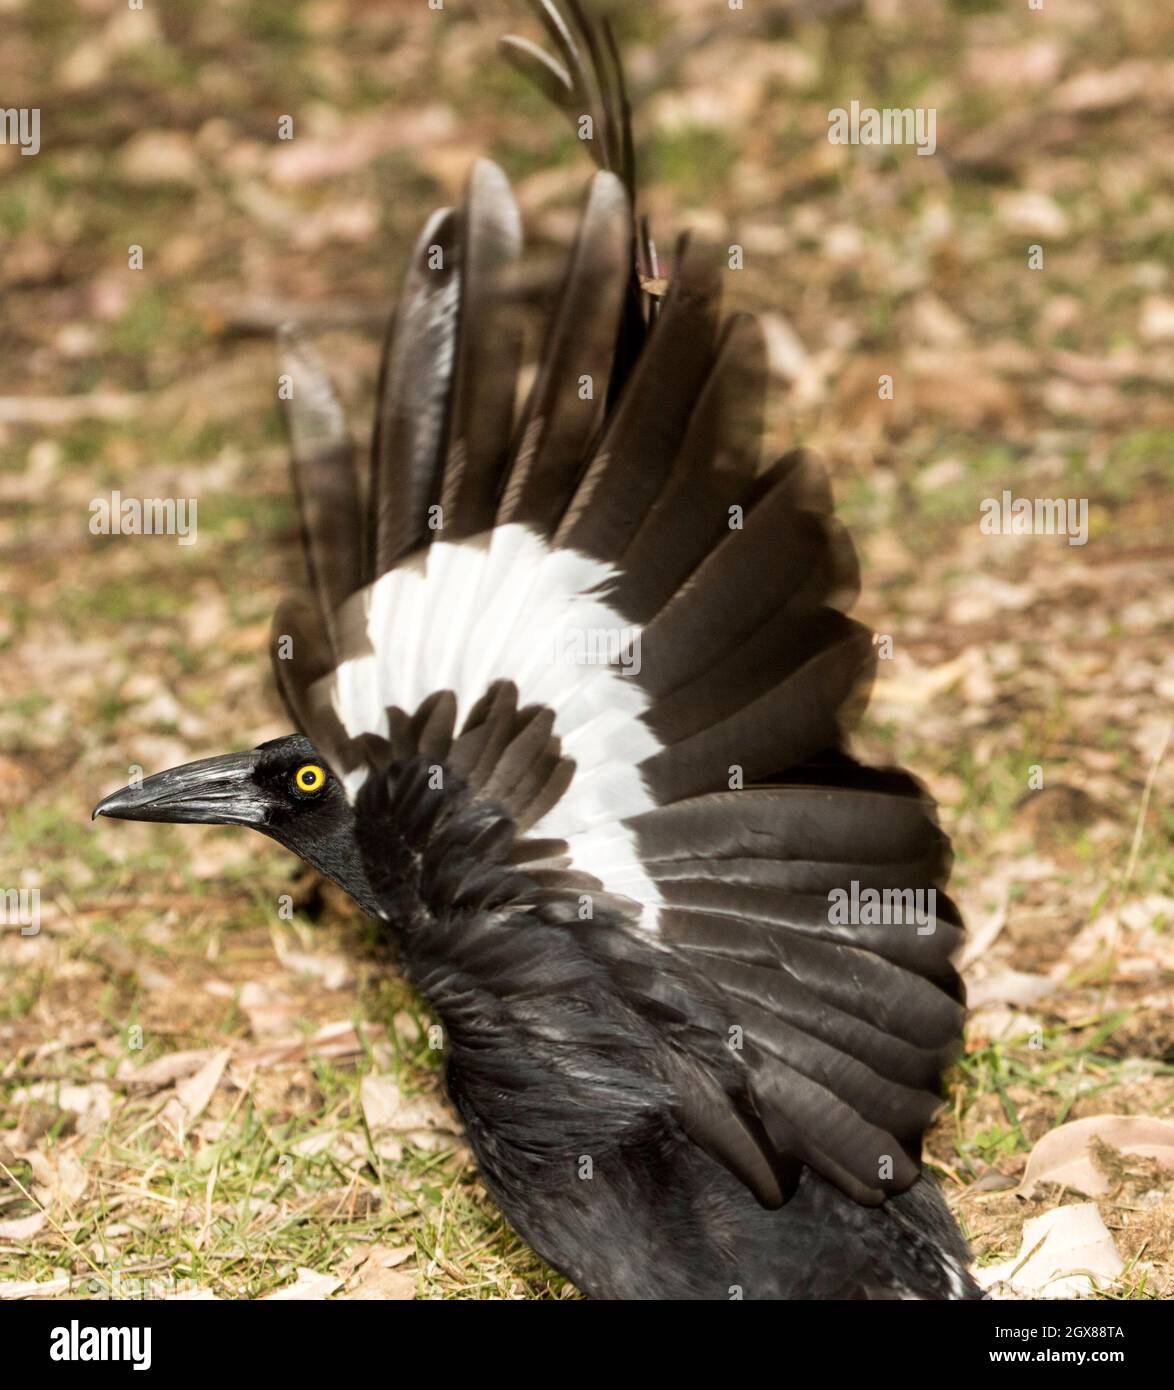 Pied Currawong, Strepera graculina, with wings outstretched ready for flight, in Kroombit Tops National Park, Queensland Australia Stock Photo